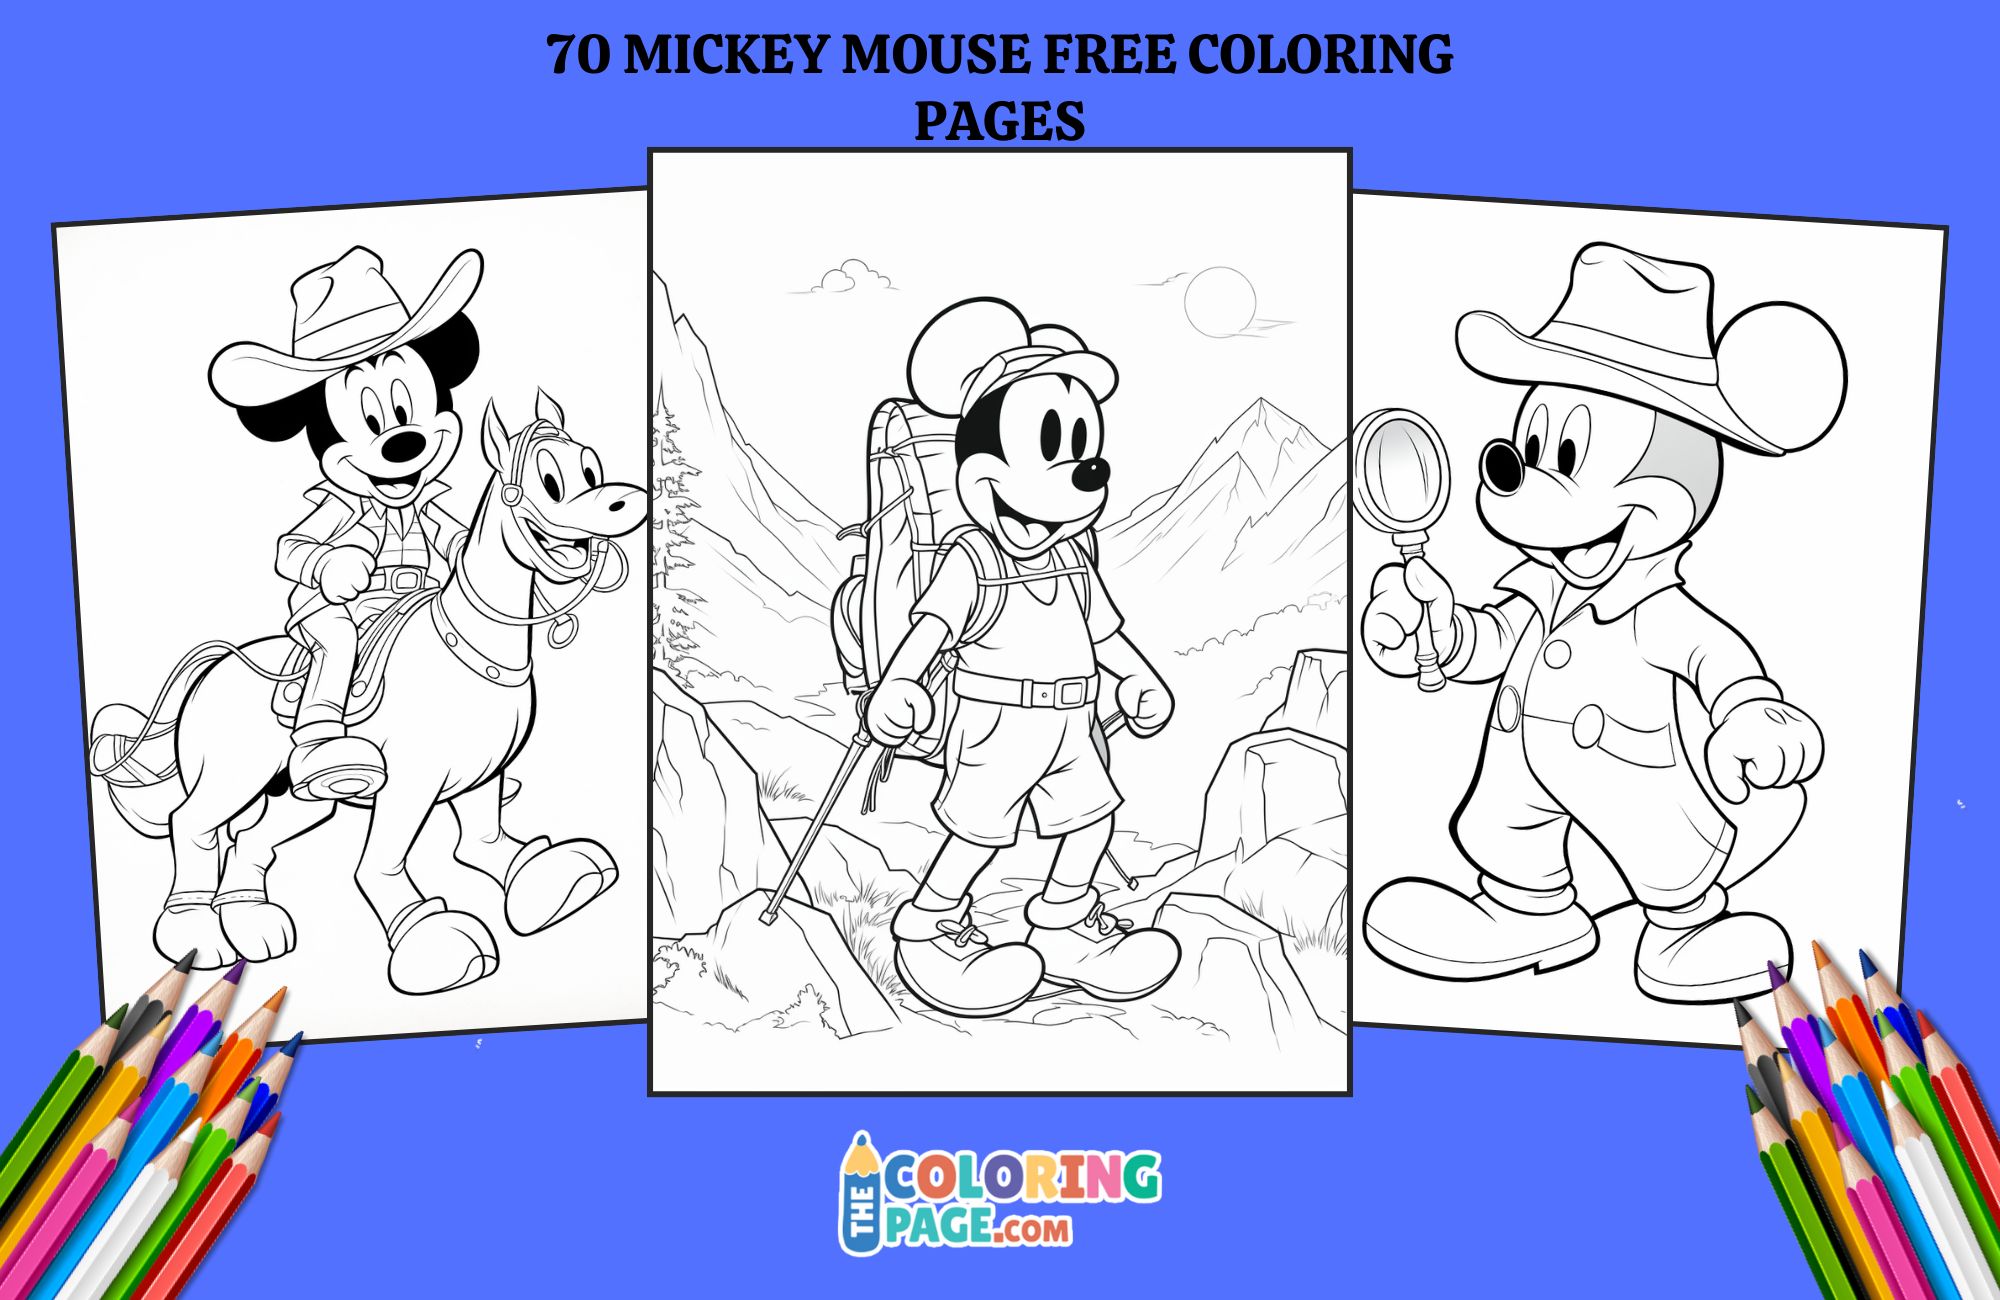 70 Mickey Mouse Coloring Pages for kids